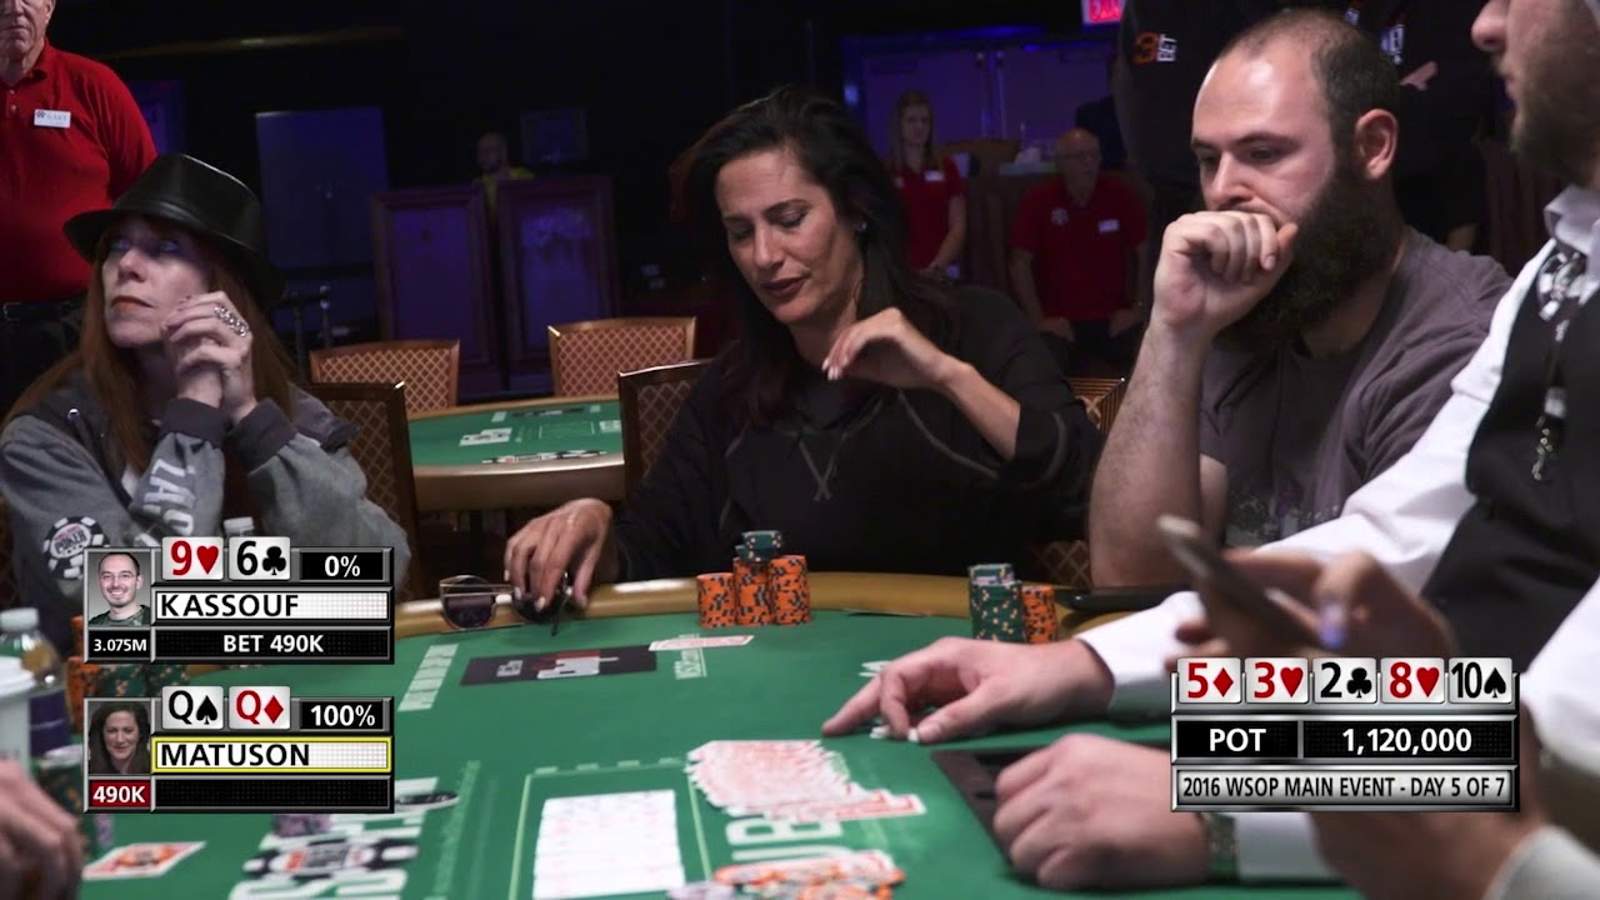 2016 WSOP Main Event: Hand of the Year